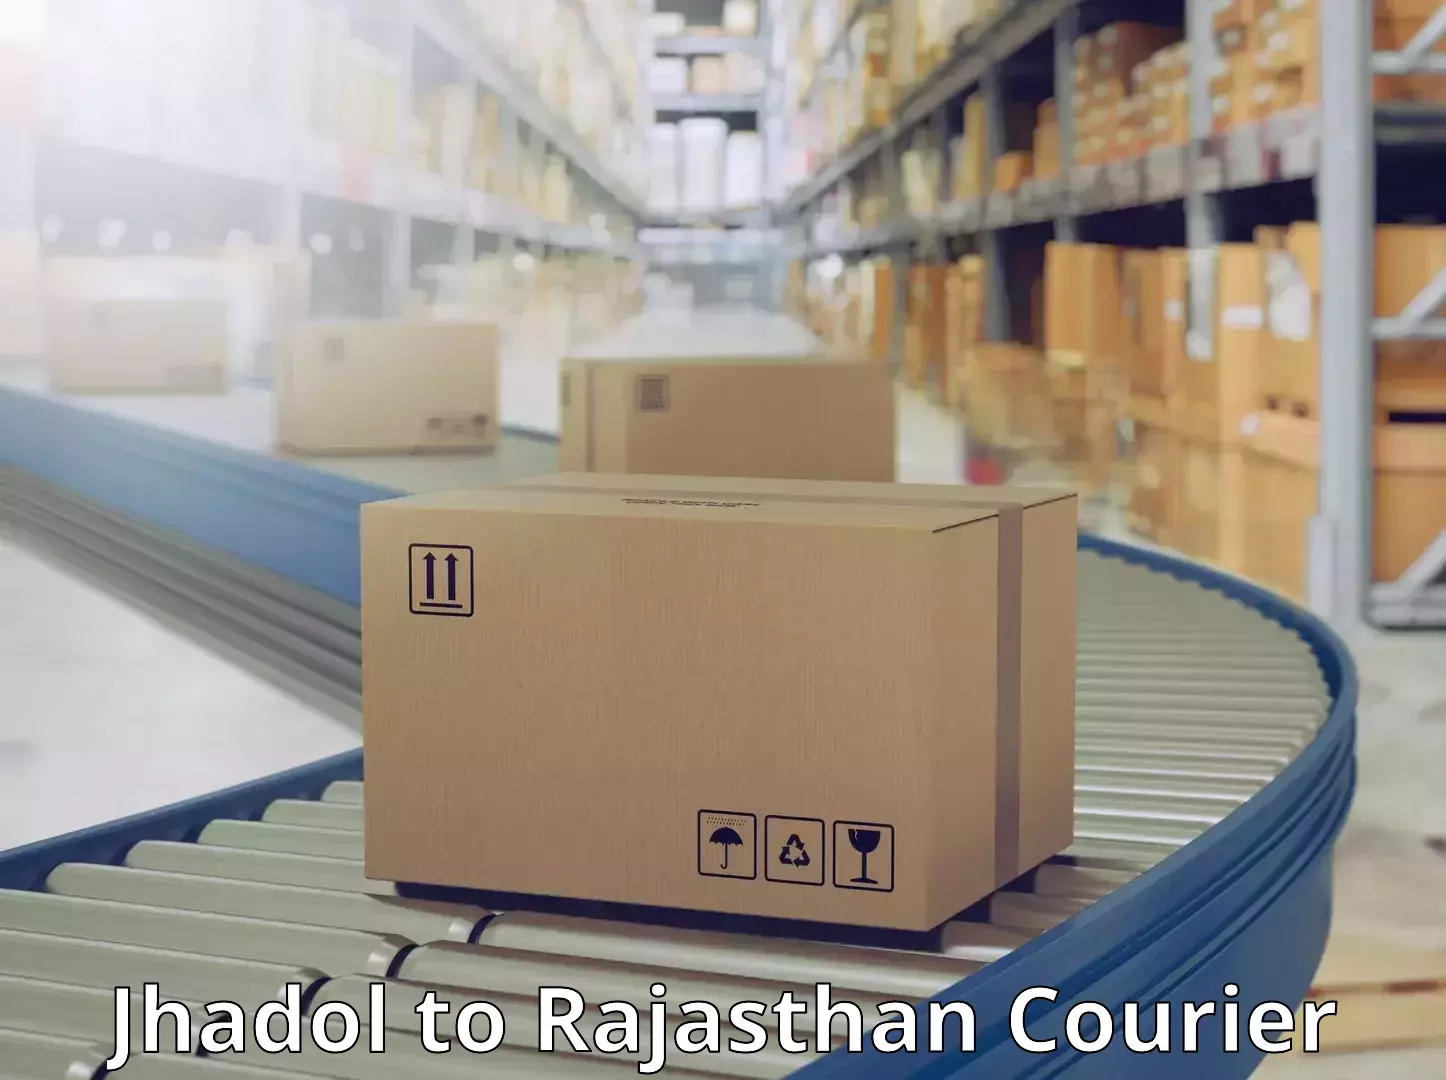 Courier service efficiency Jhadol to Rajasthan